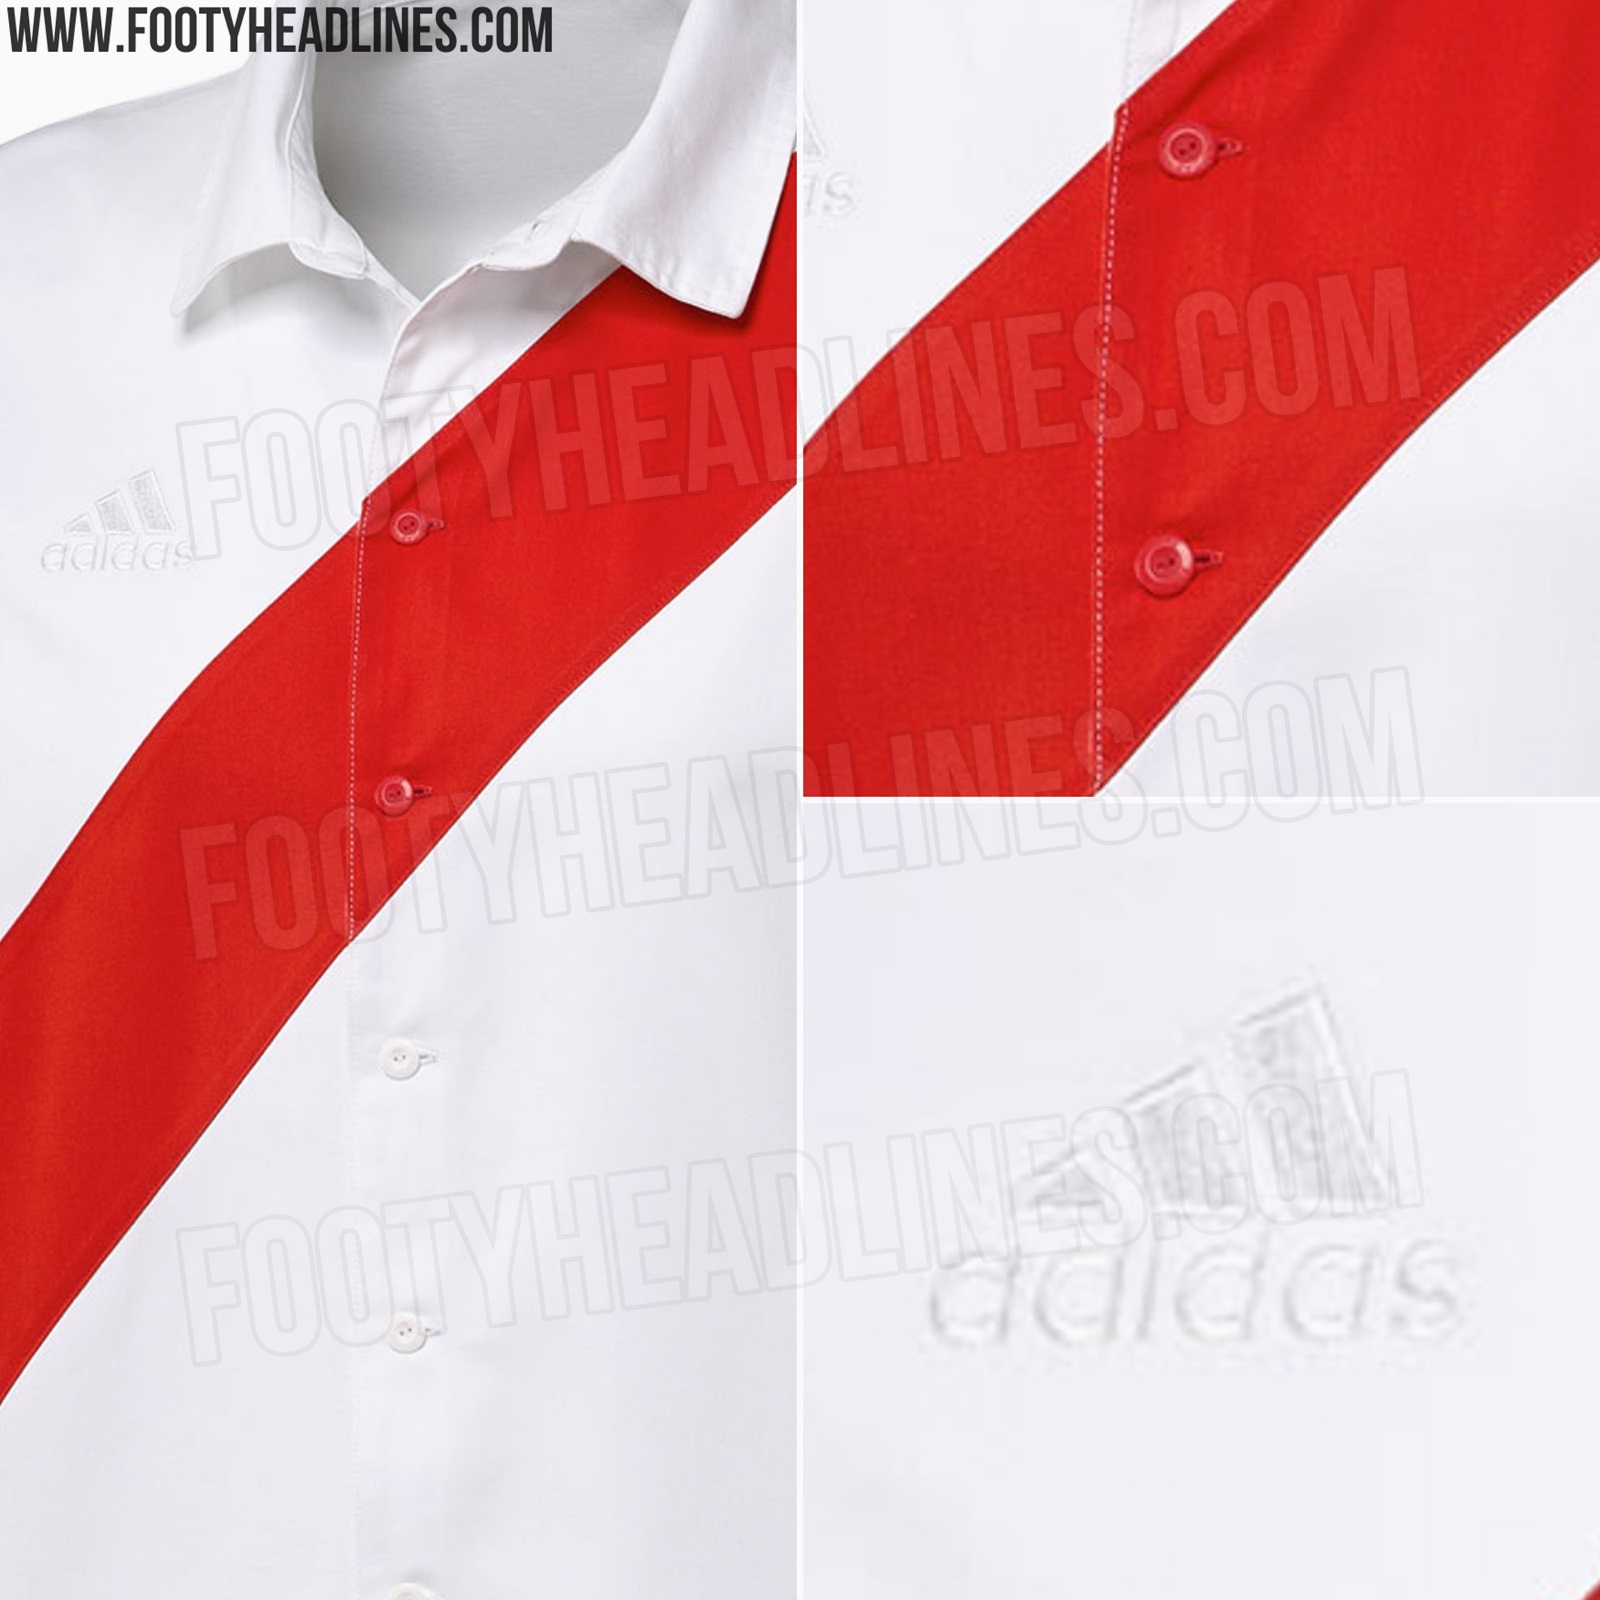 River Plate 1985 Adidas Retro Jersey - Football Shirt Culture - Latest Football  Kit News and More